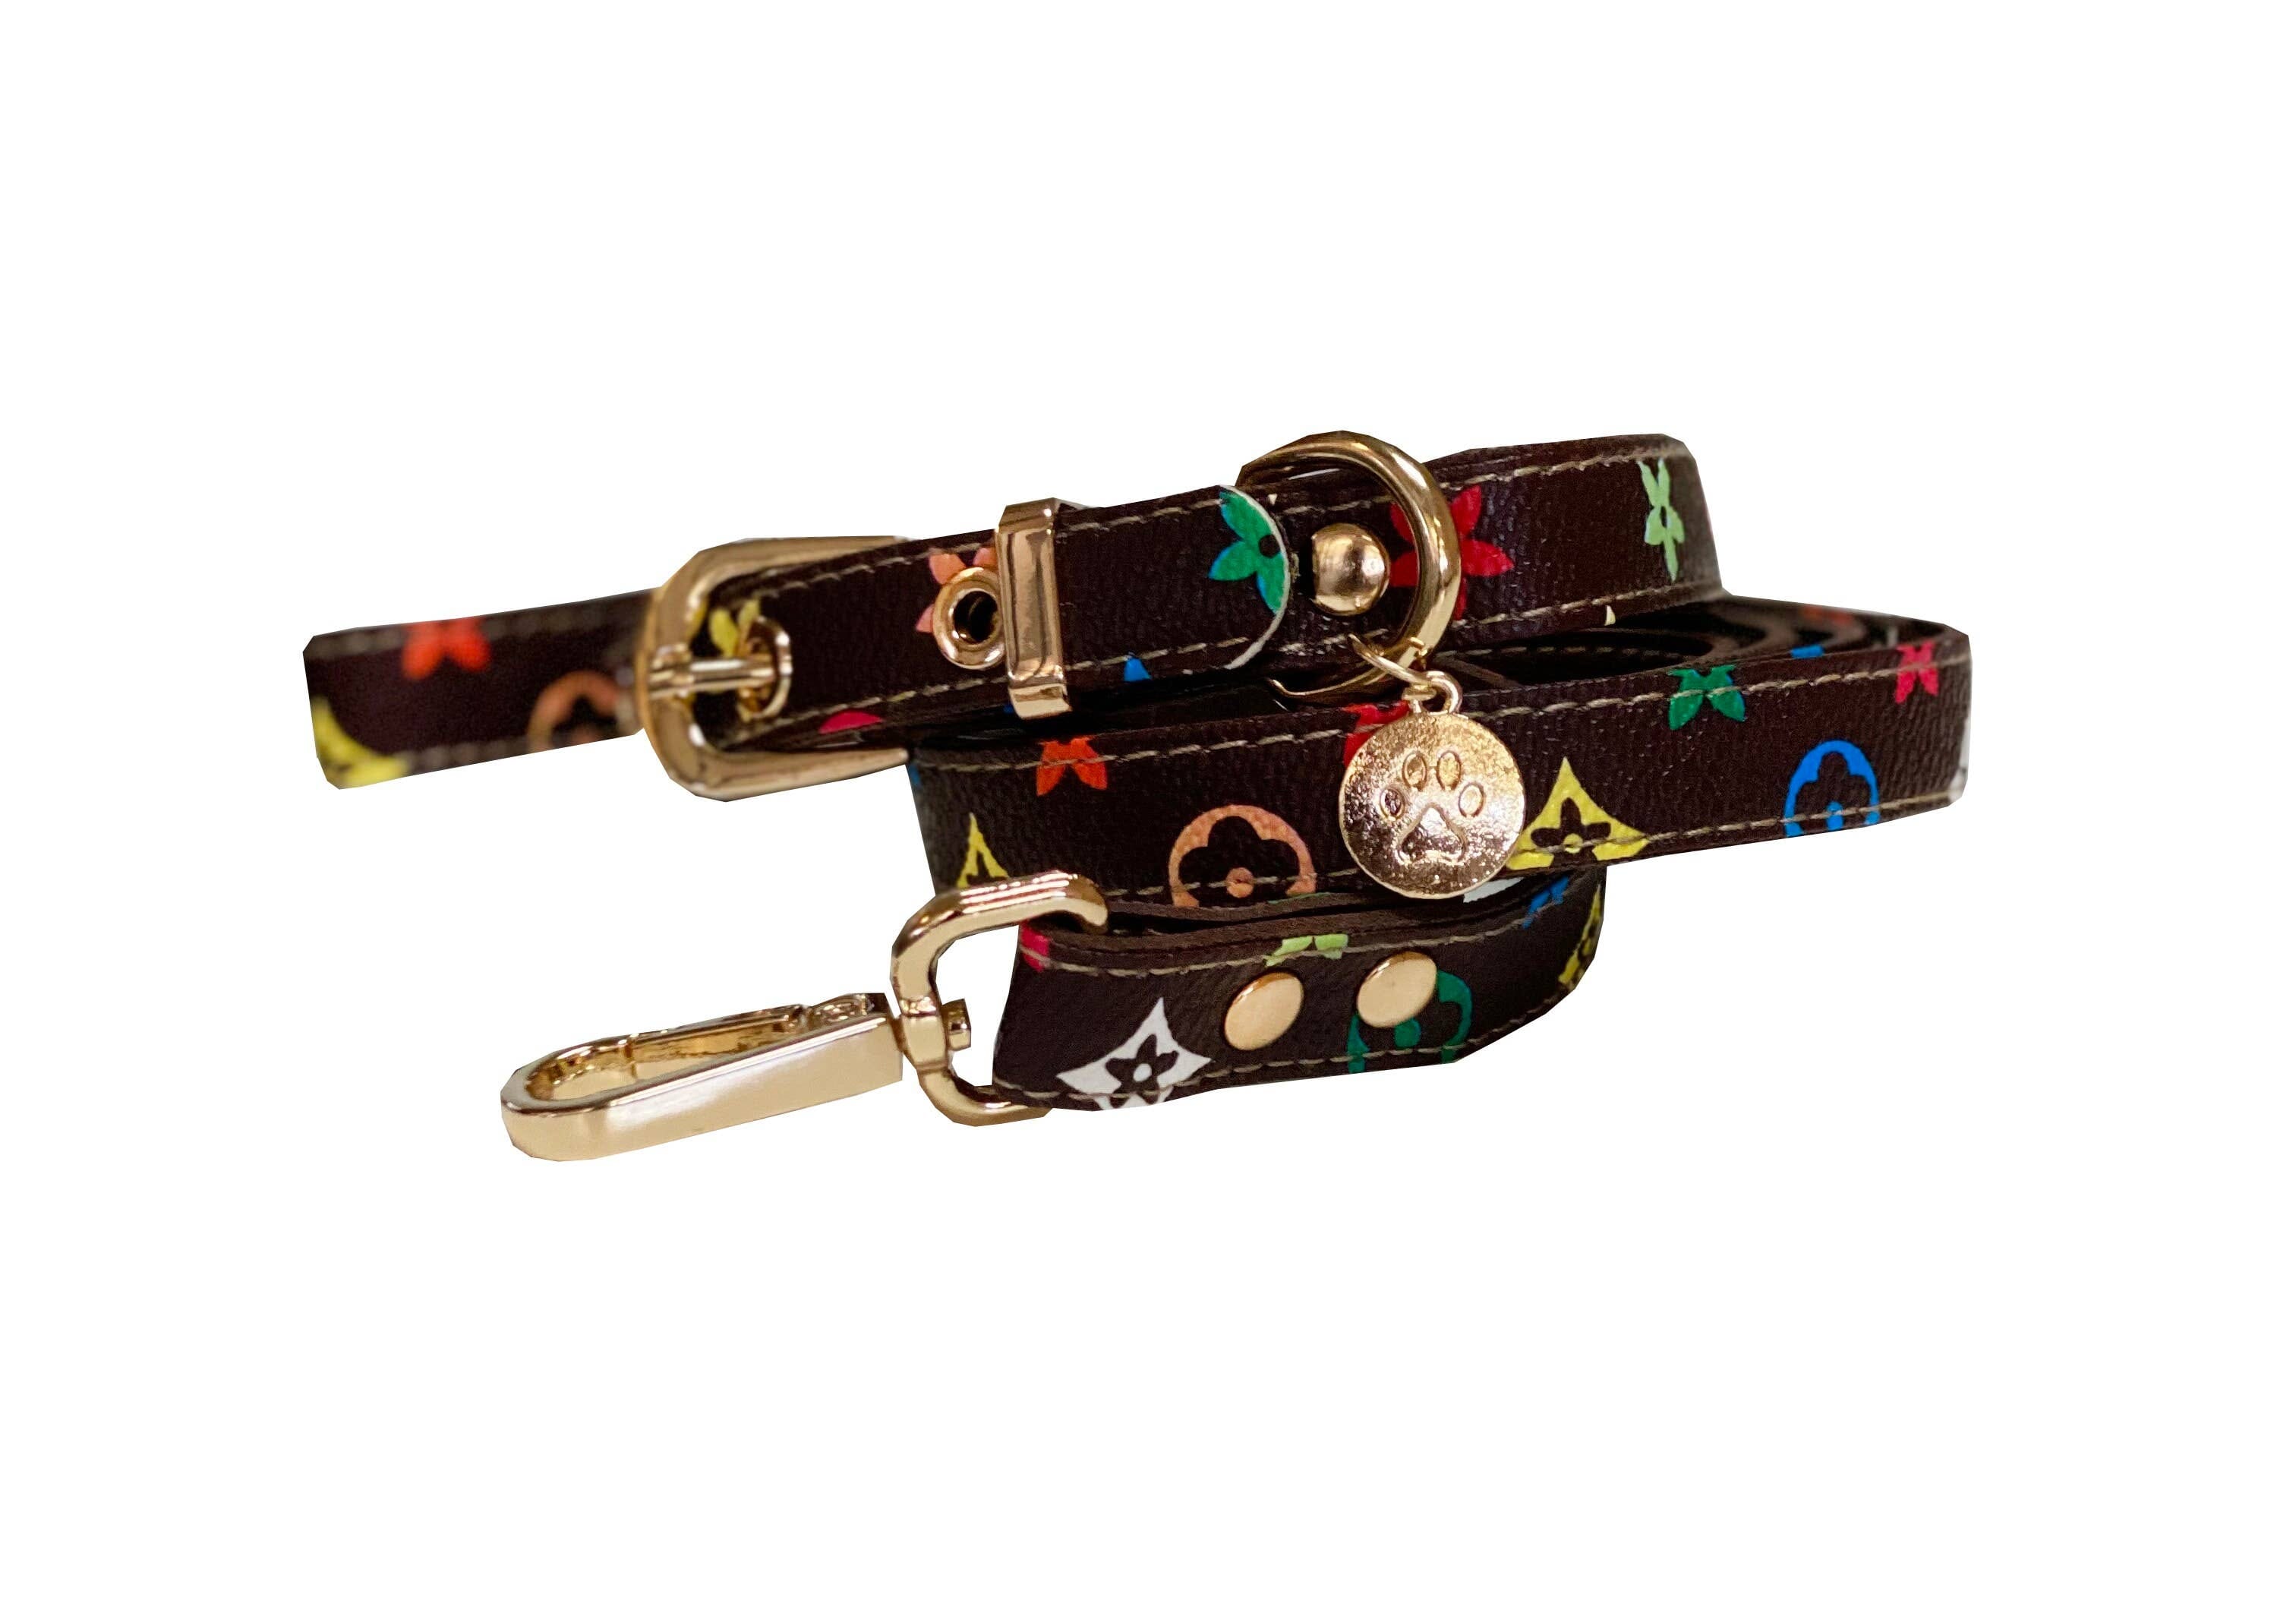 Louis Vuitton Dog Collars And Leash